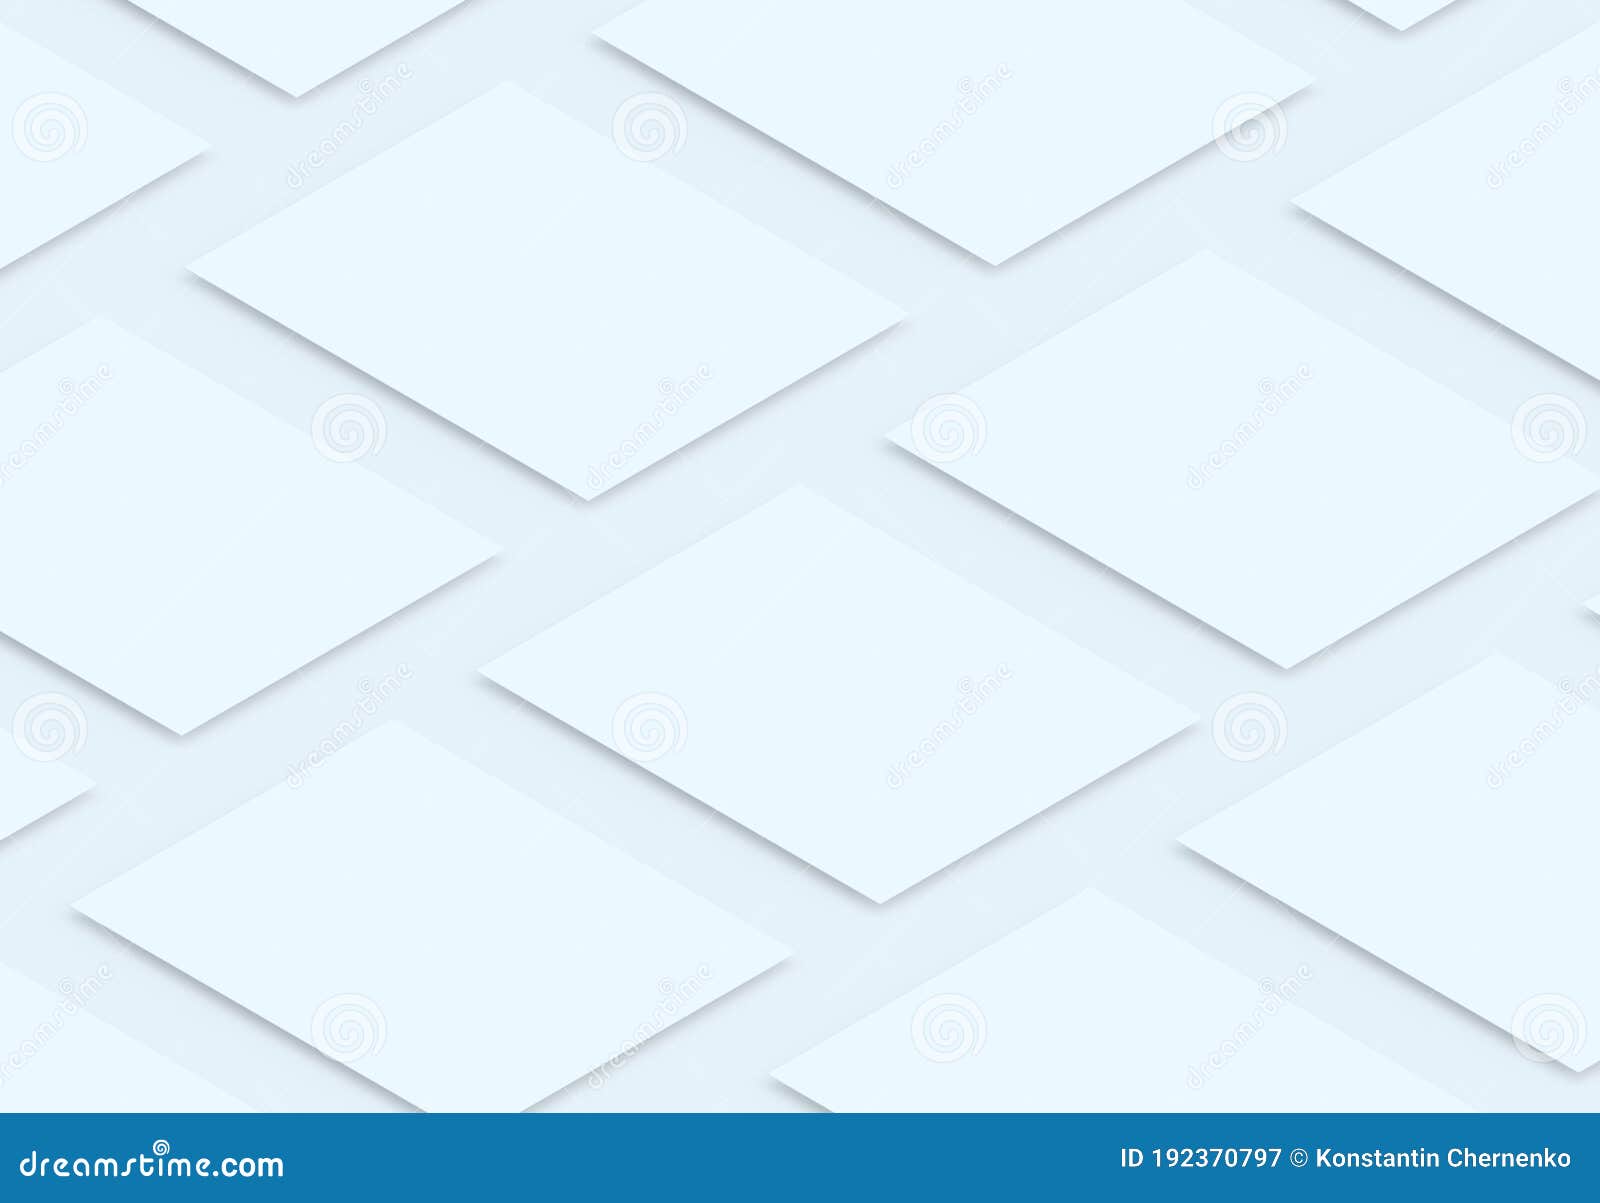 Isometric Instagram Vertical Post Mockup with with White Background Stock  Illustration - Illustration of pattern, media: 192370797